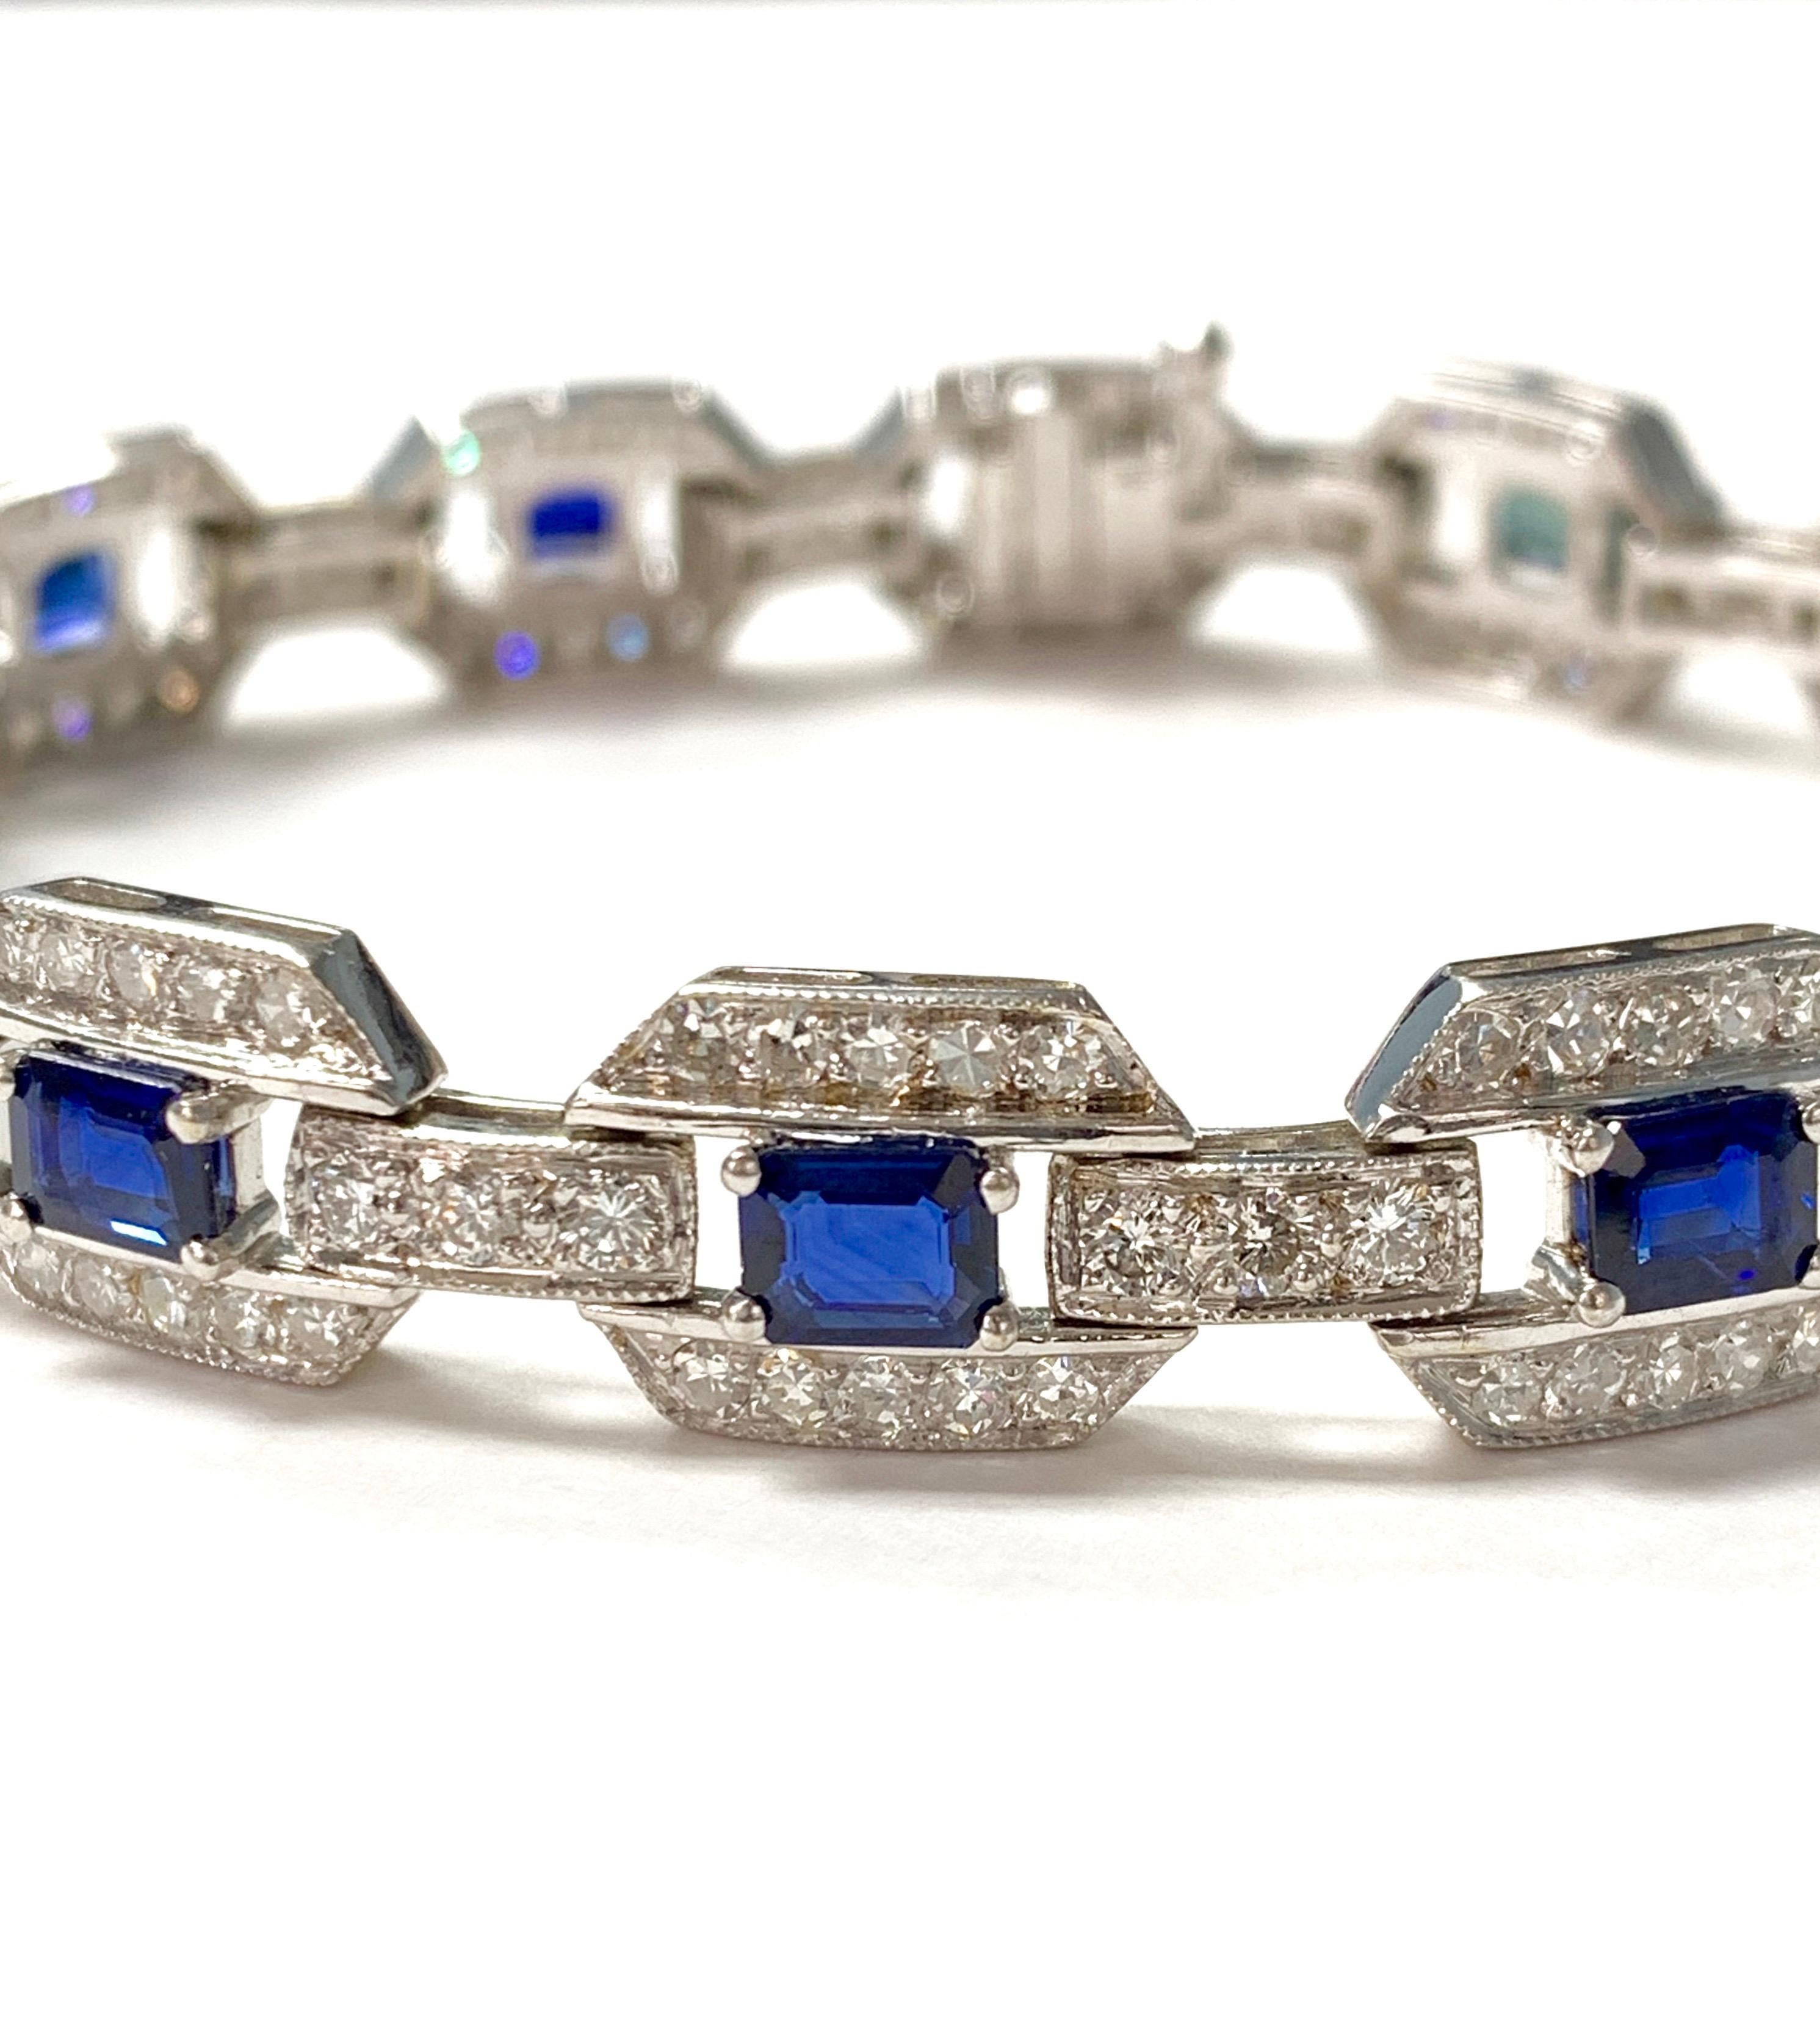 Very pretty blue sapphire and diamond bracelet beautifully hand crafted in 18k white gold. 
The details are as follows : 
Blue sapphire weight : 4.95 carat 
Diamond weight : 4.05 carat (GH VS ) 
Metal : 18k White gold 
Measurements : 7 inches